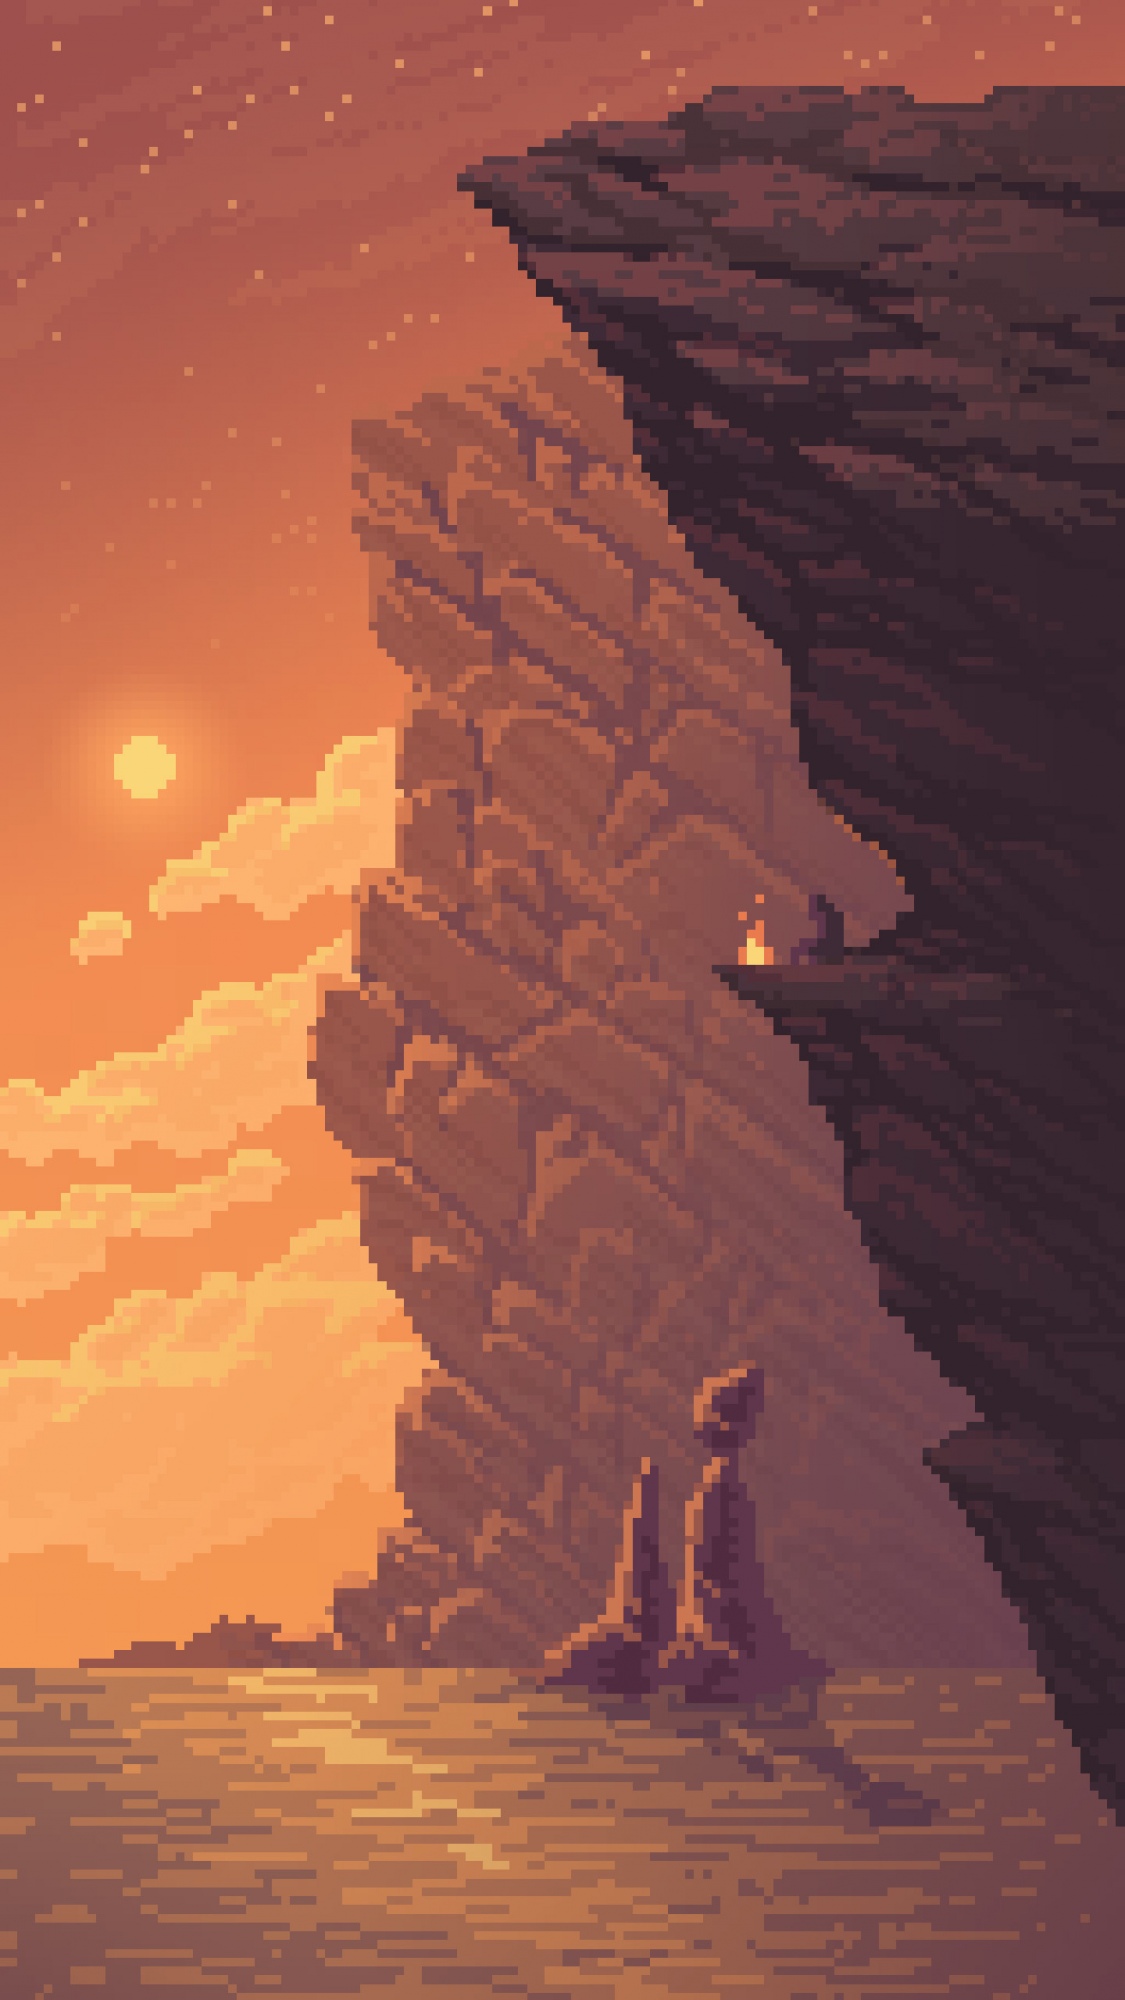 Campfire on Cliff